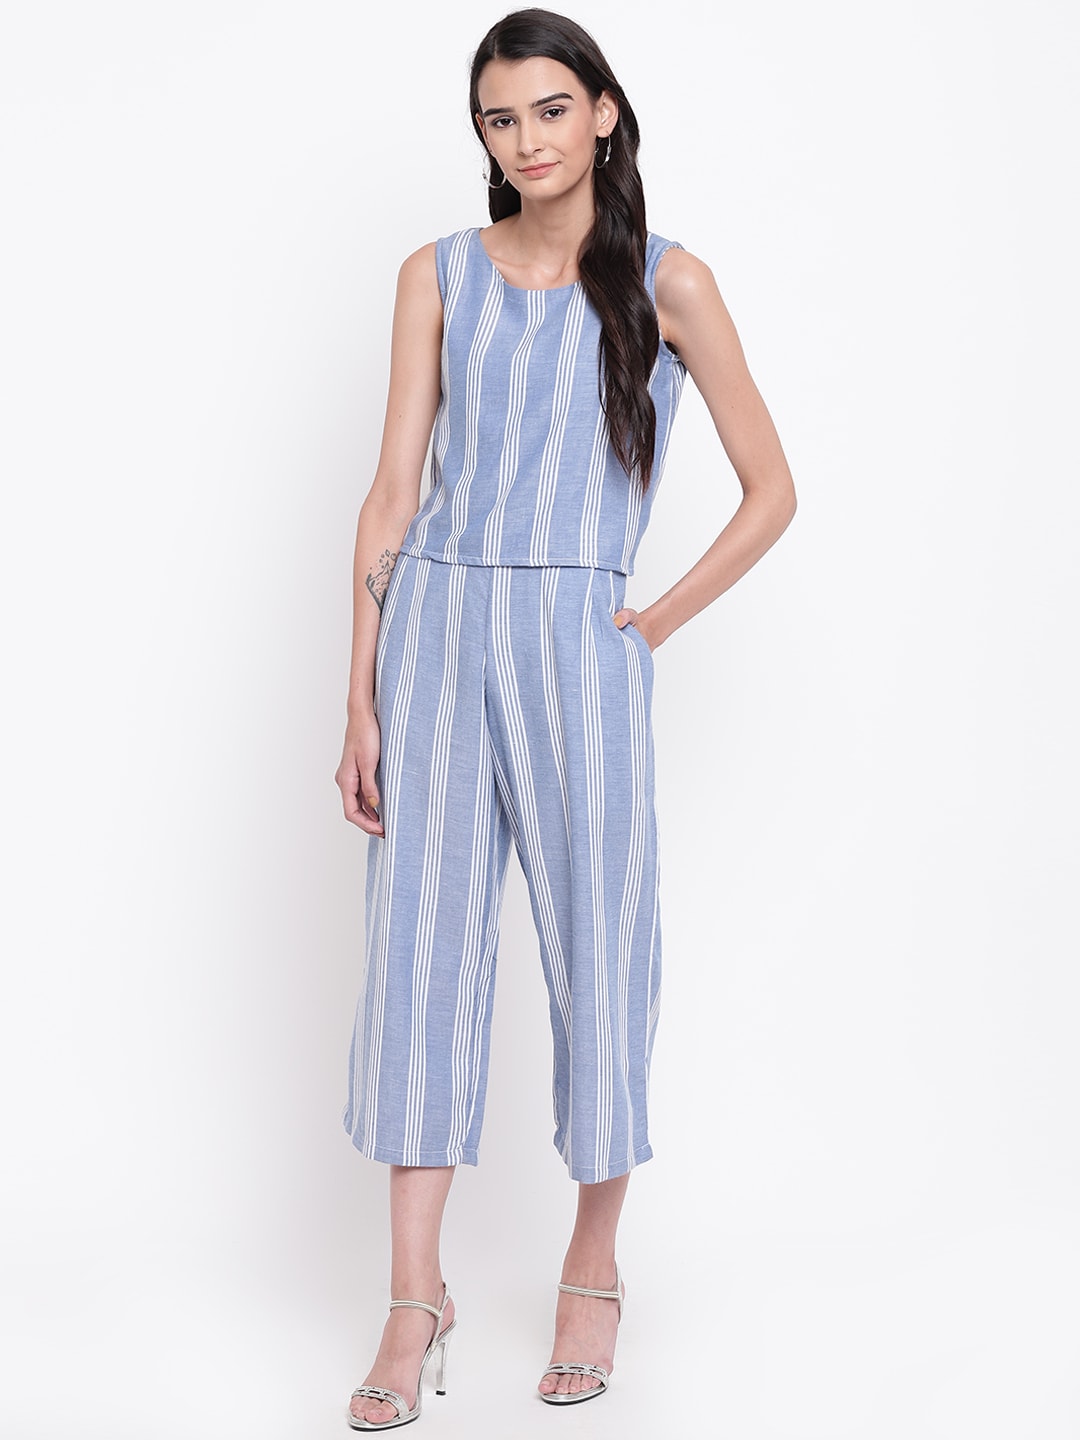 Belle Fille Blue & White Striped Layered Capri Jumpsuit Price in India